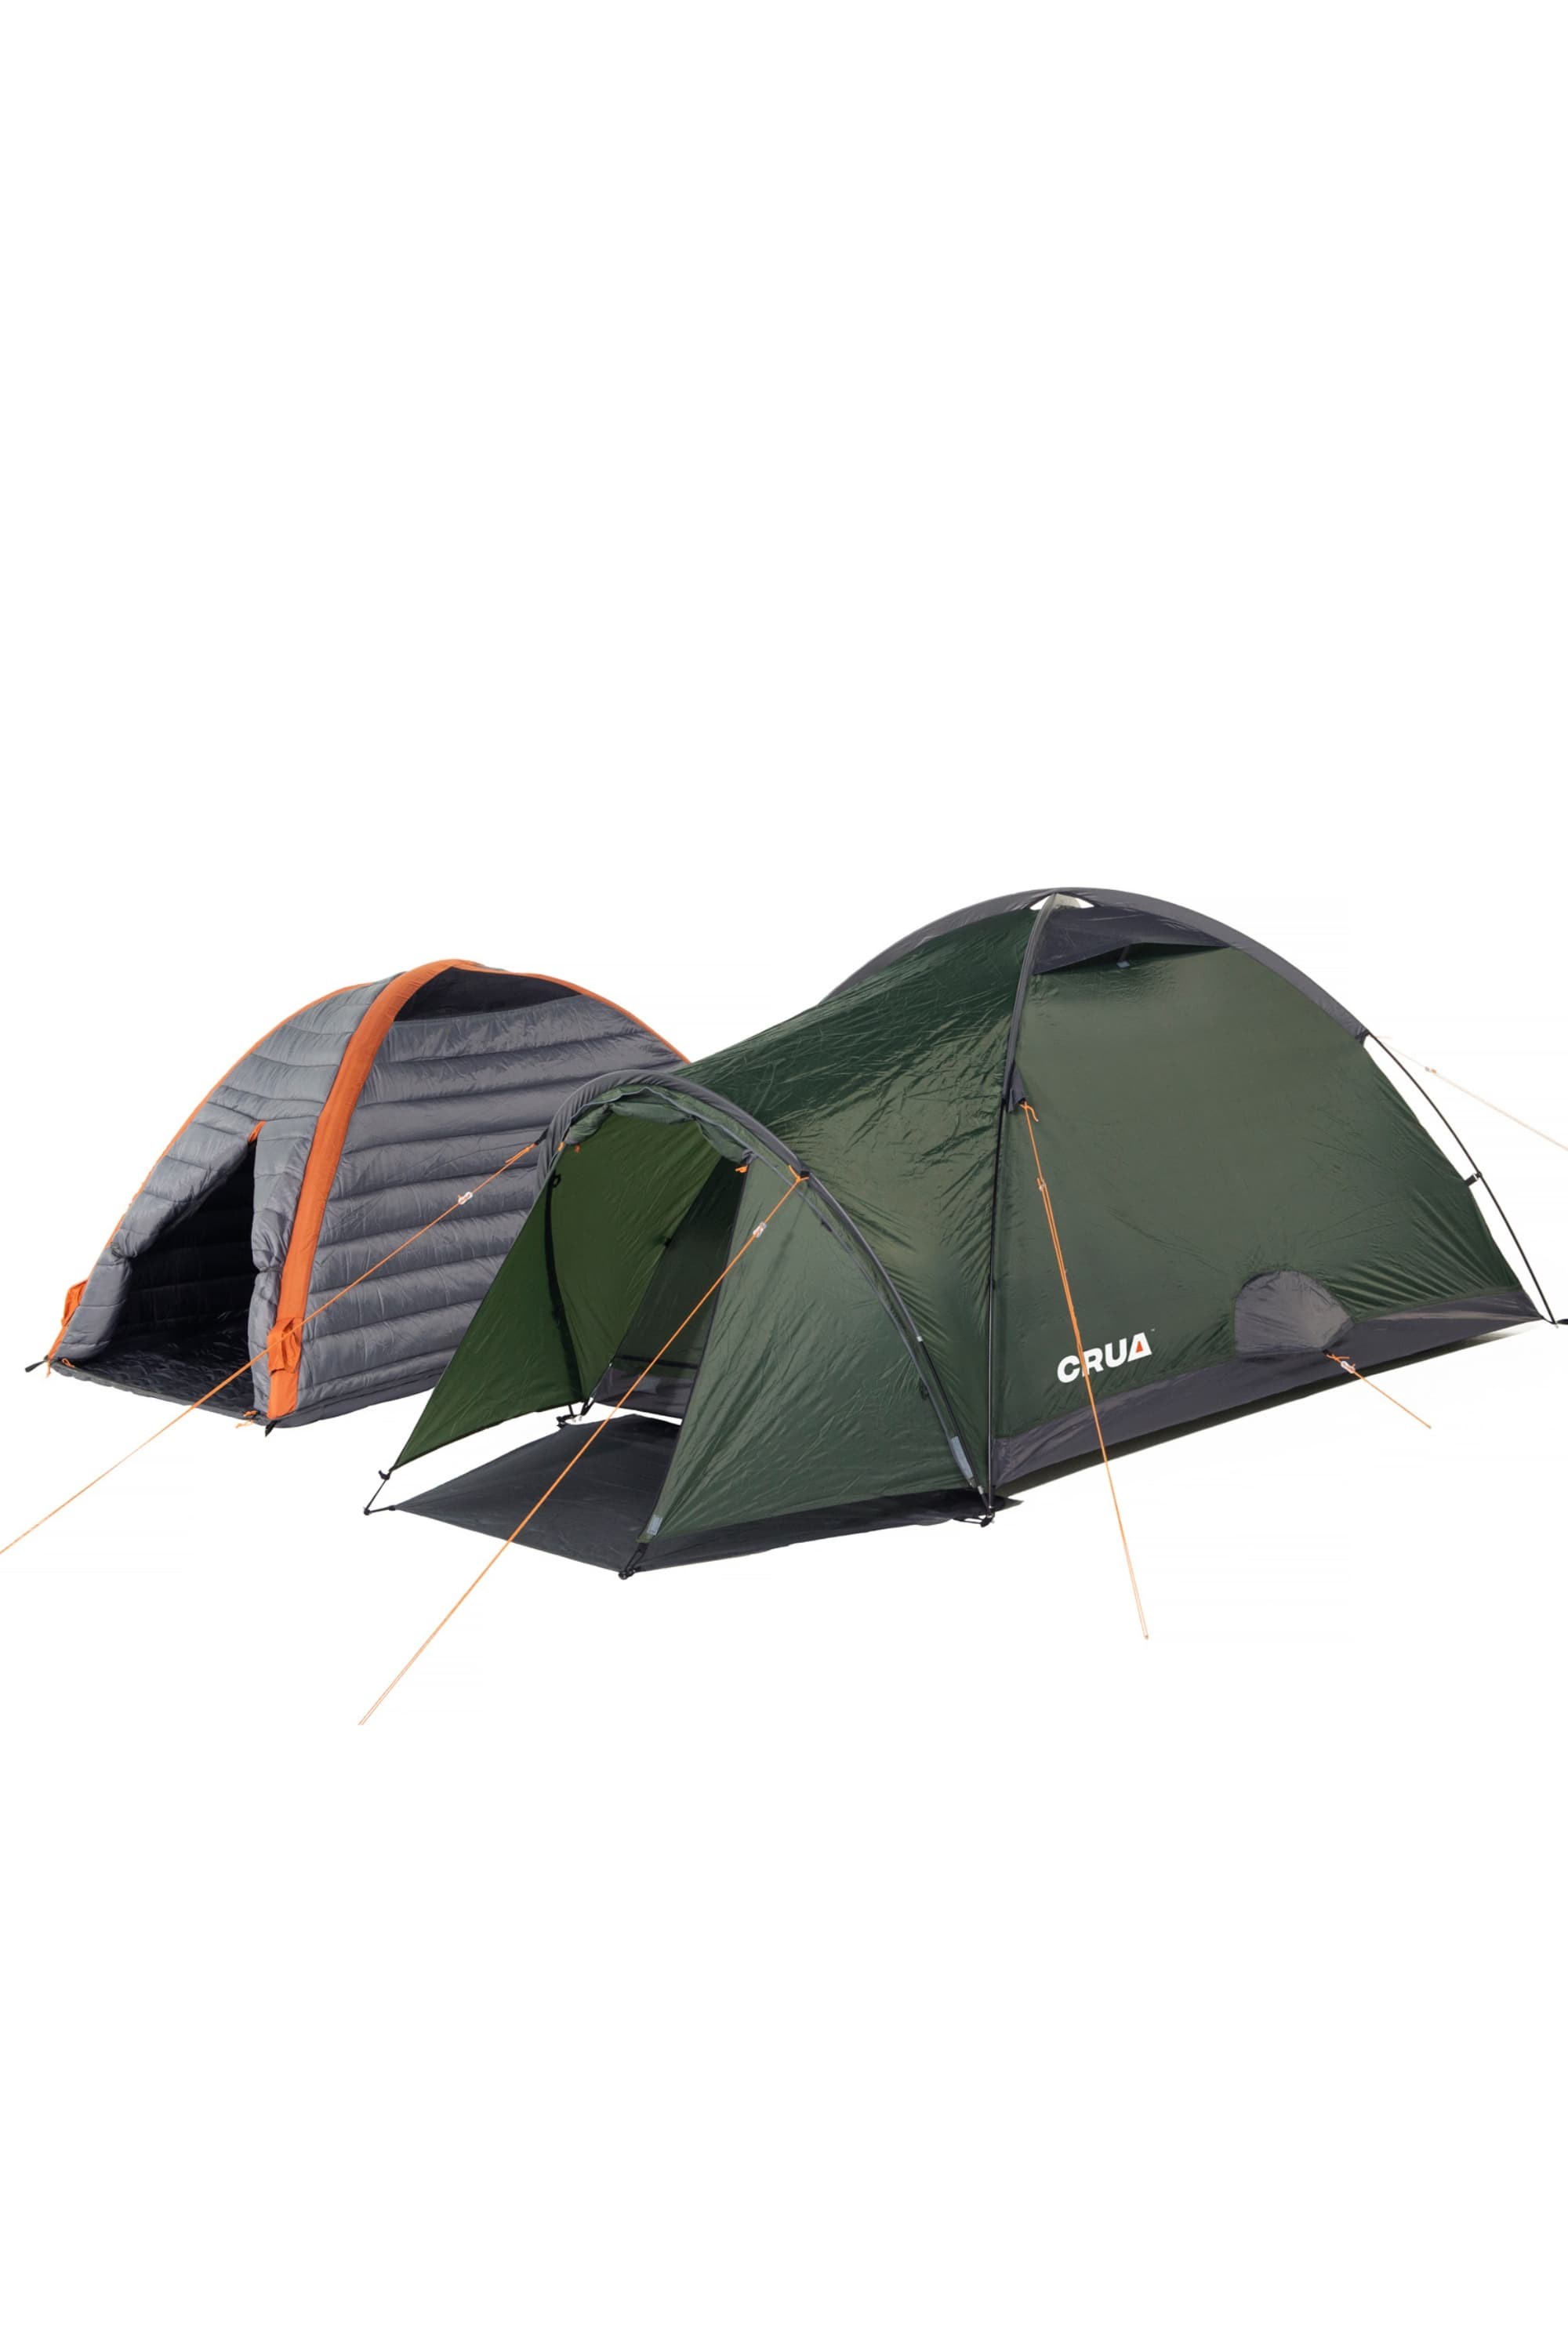 Combo 2 Man Camping Insulated Tent Set -